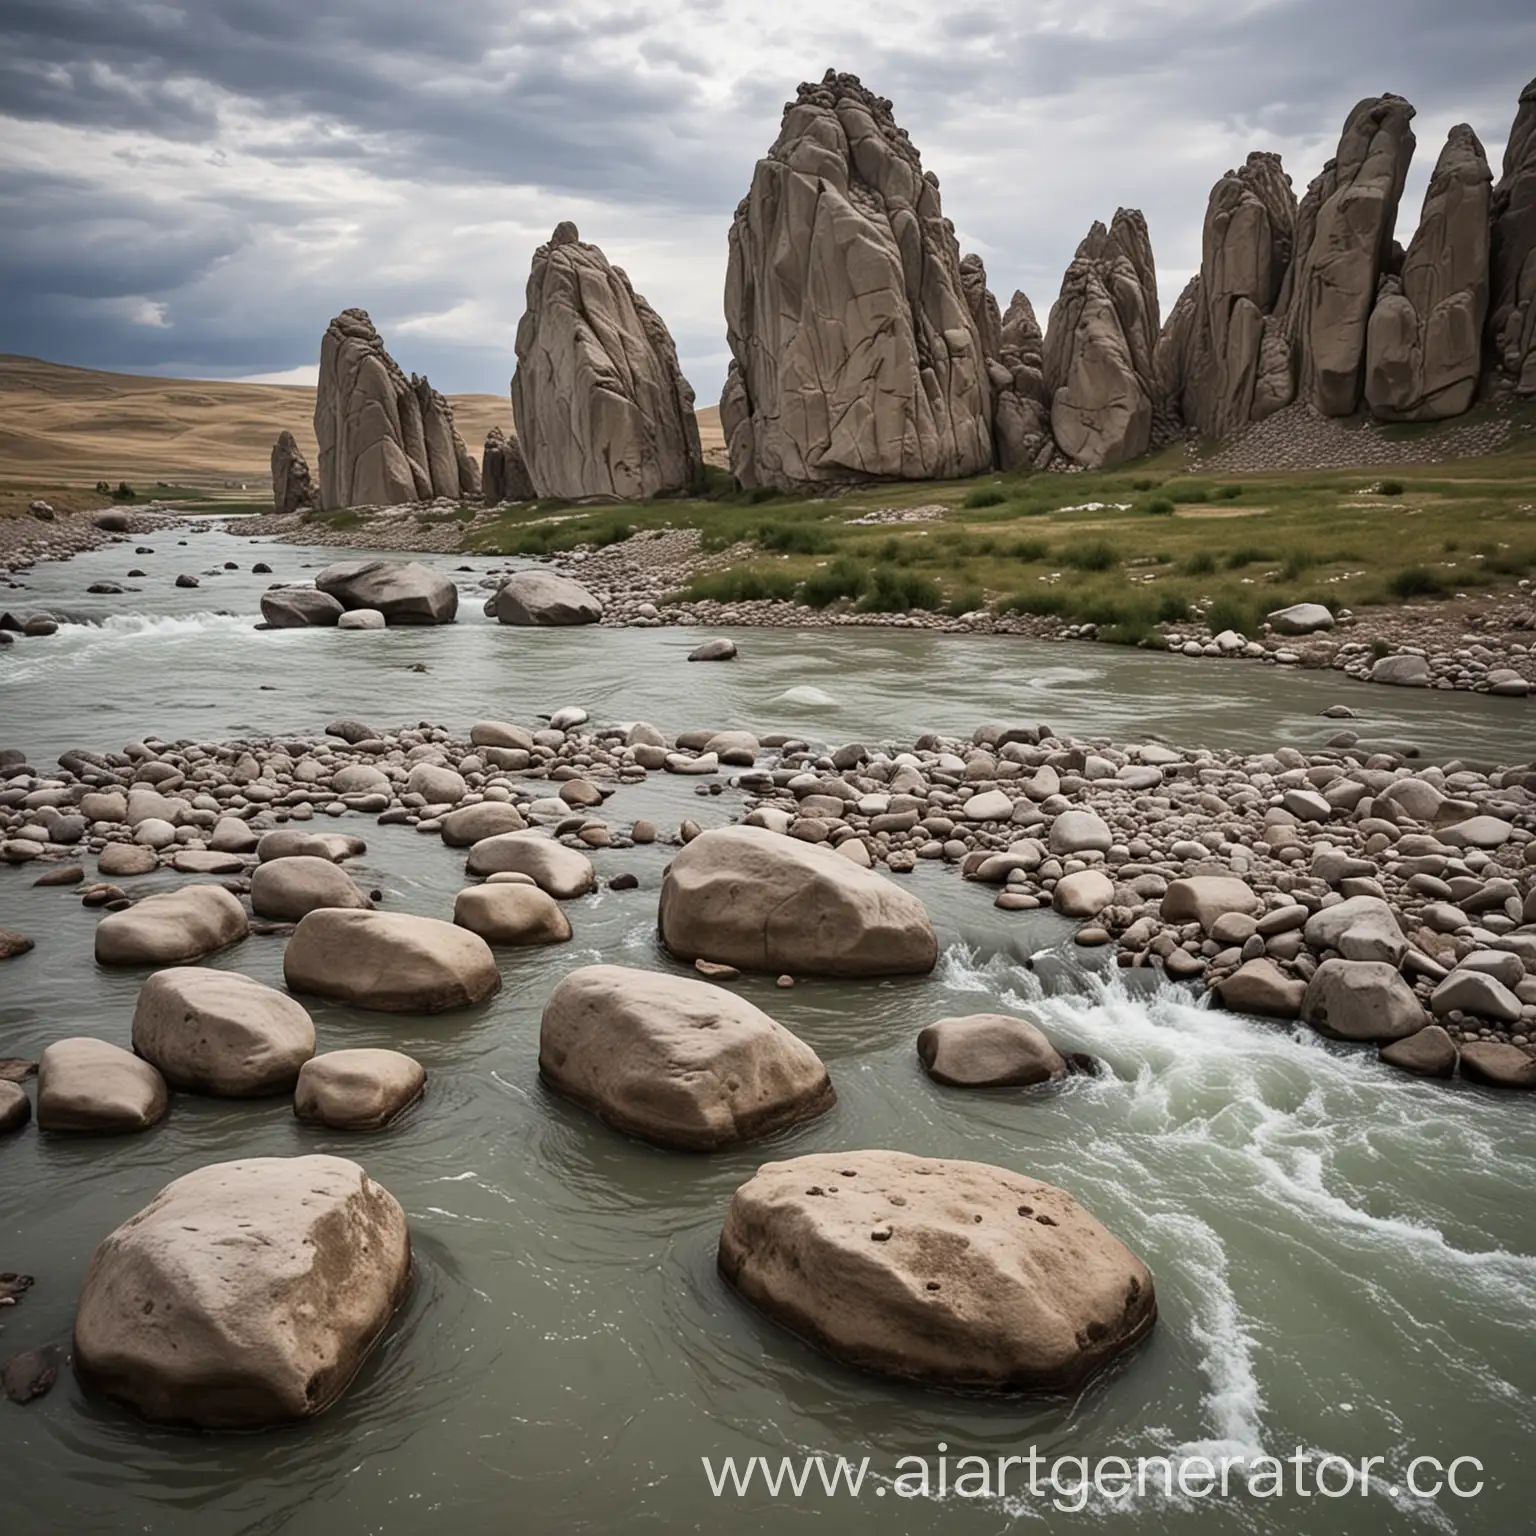 Stone-Giants-Frozen-in-Time-by-the-Mighty-Waters-of-Tashly-River